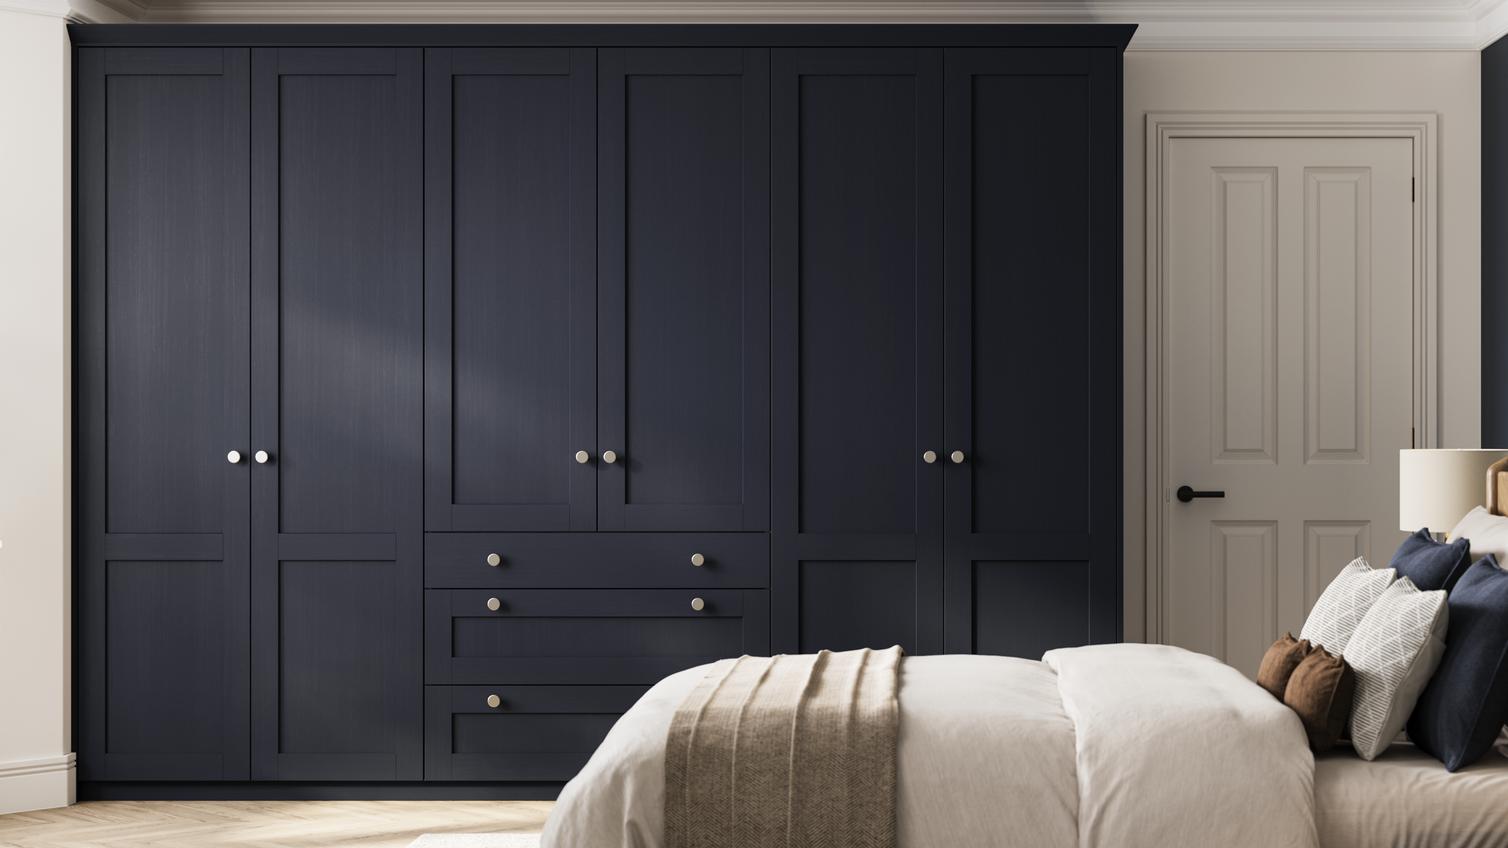 Halesworth Navy Bedroom One Wall Bedroom With Drawers